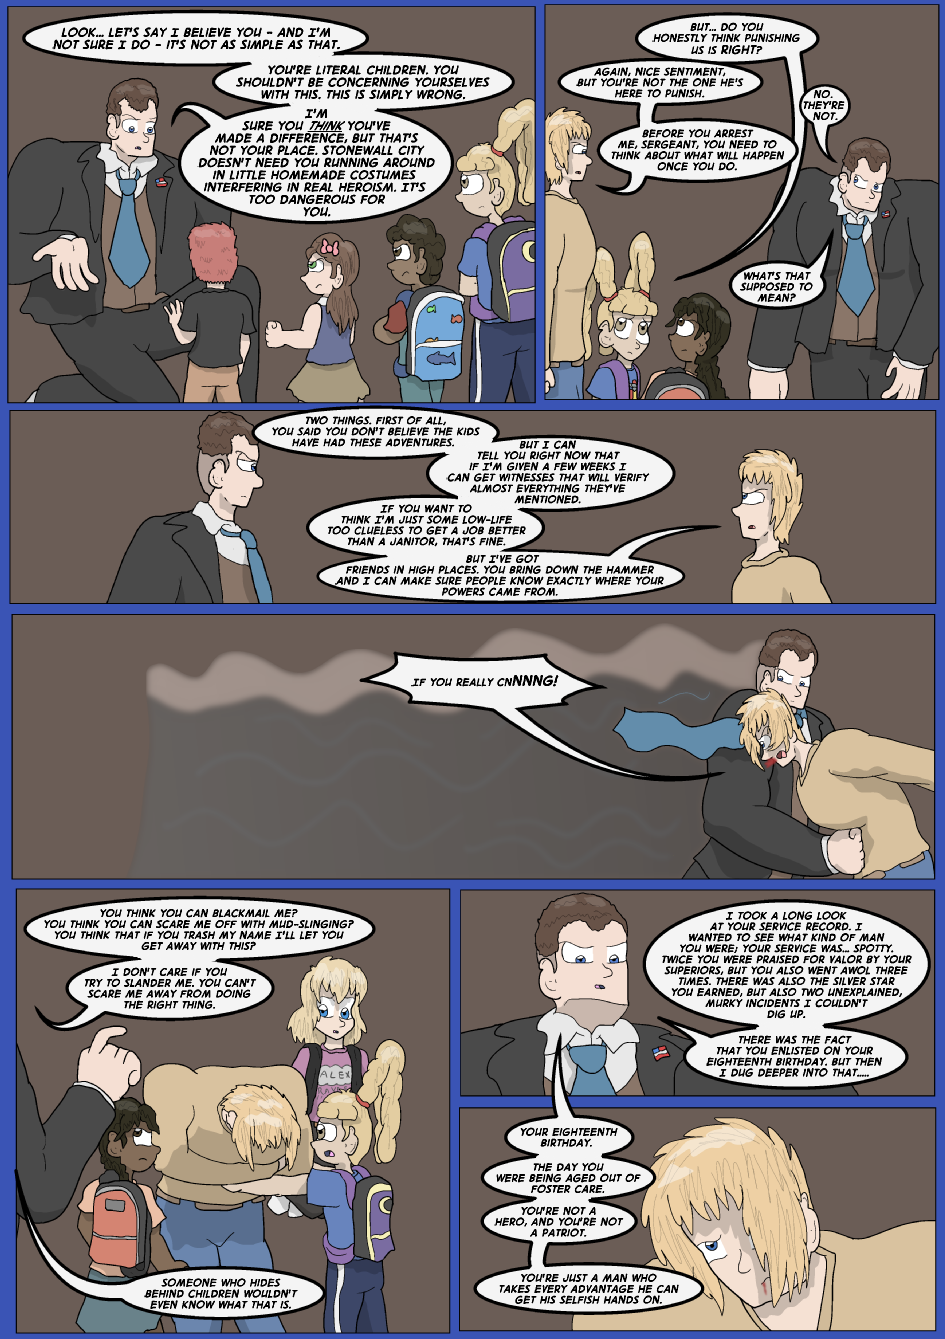 Showing Your Blue Colors- Page 10